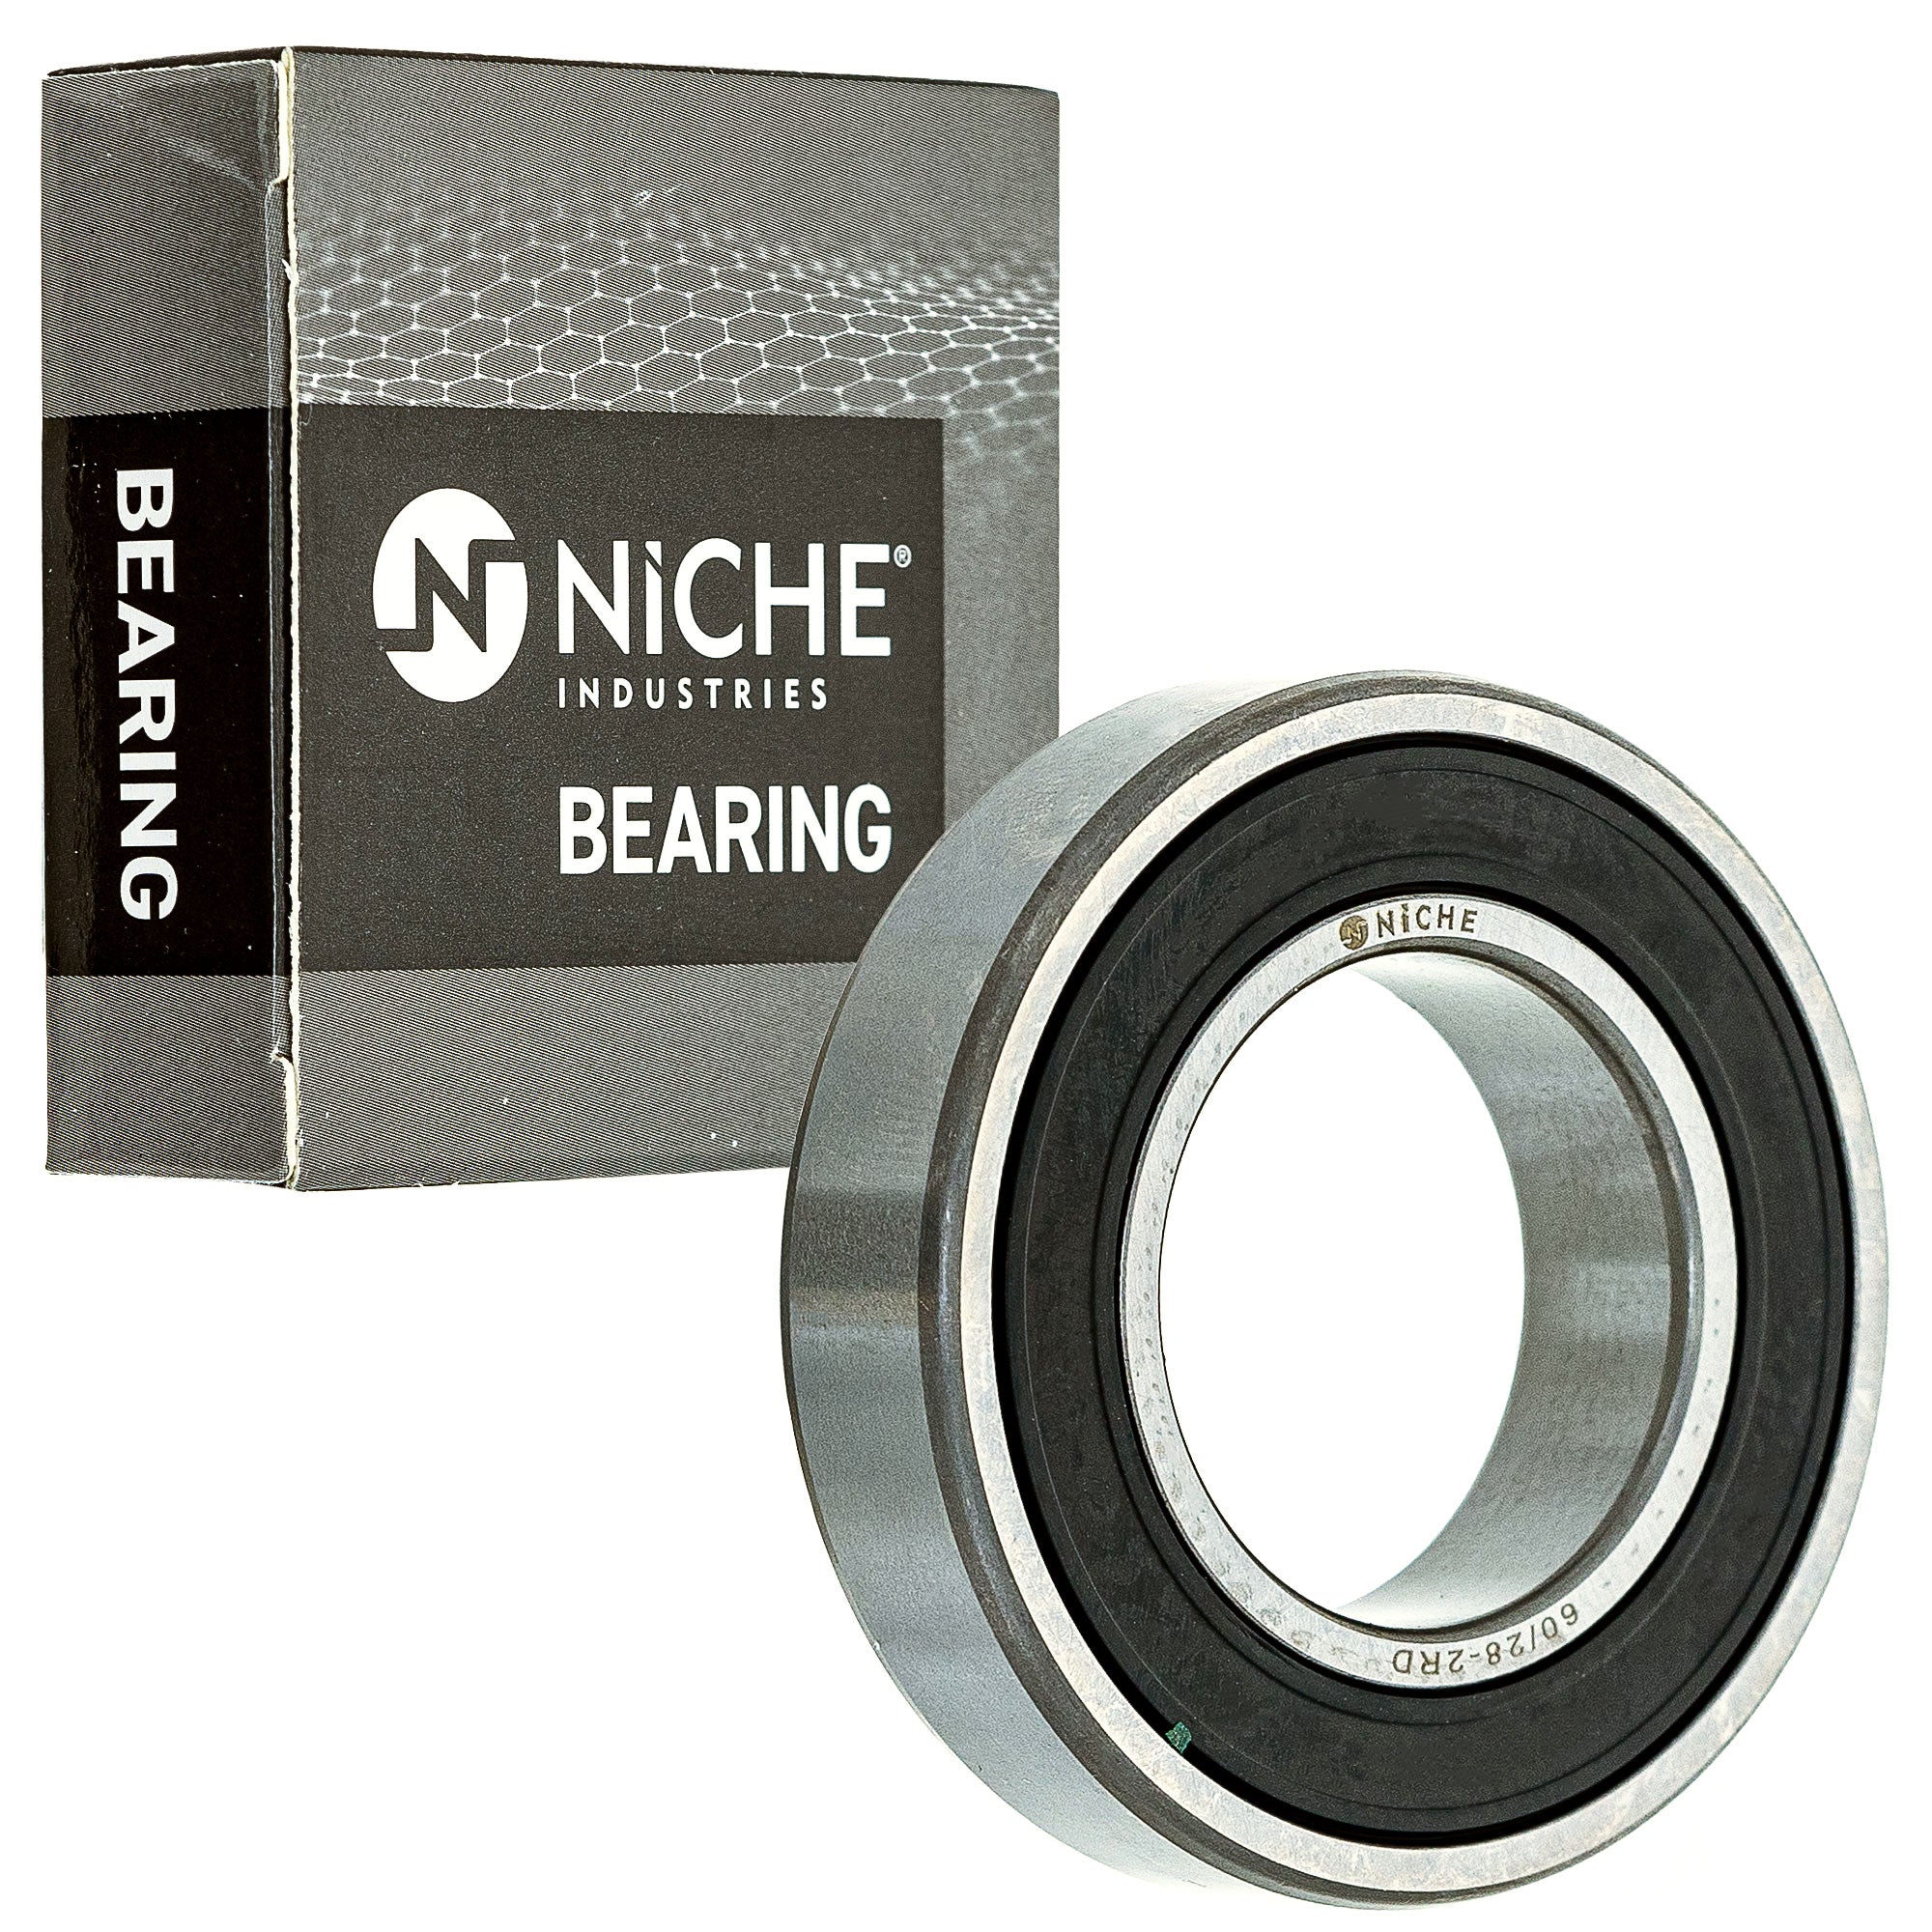 NICHE 519-CBB2321R Bearing & Seal Kit 2-Pack for zOTHER Stateline